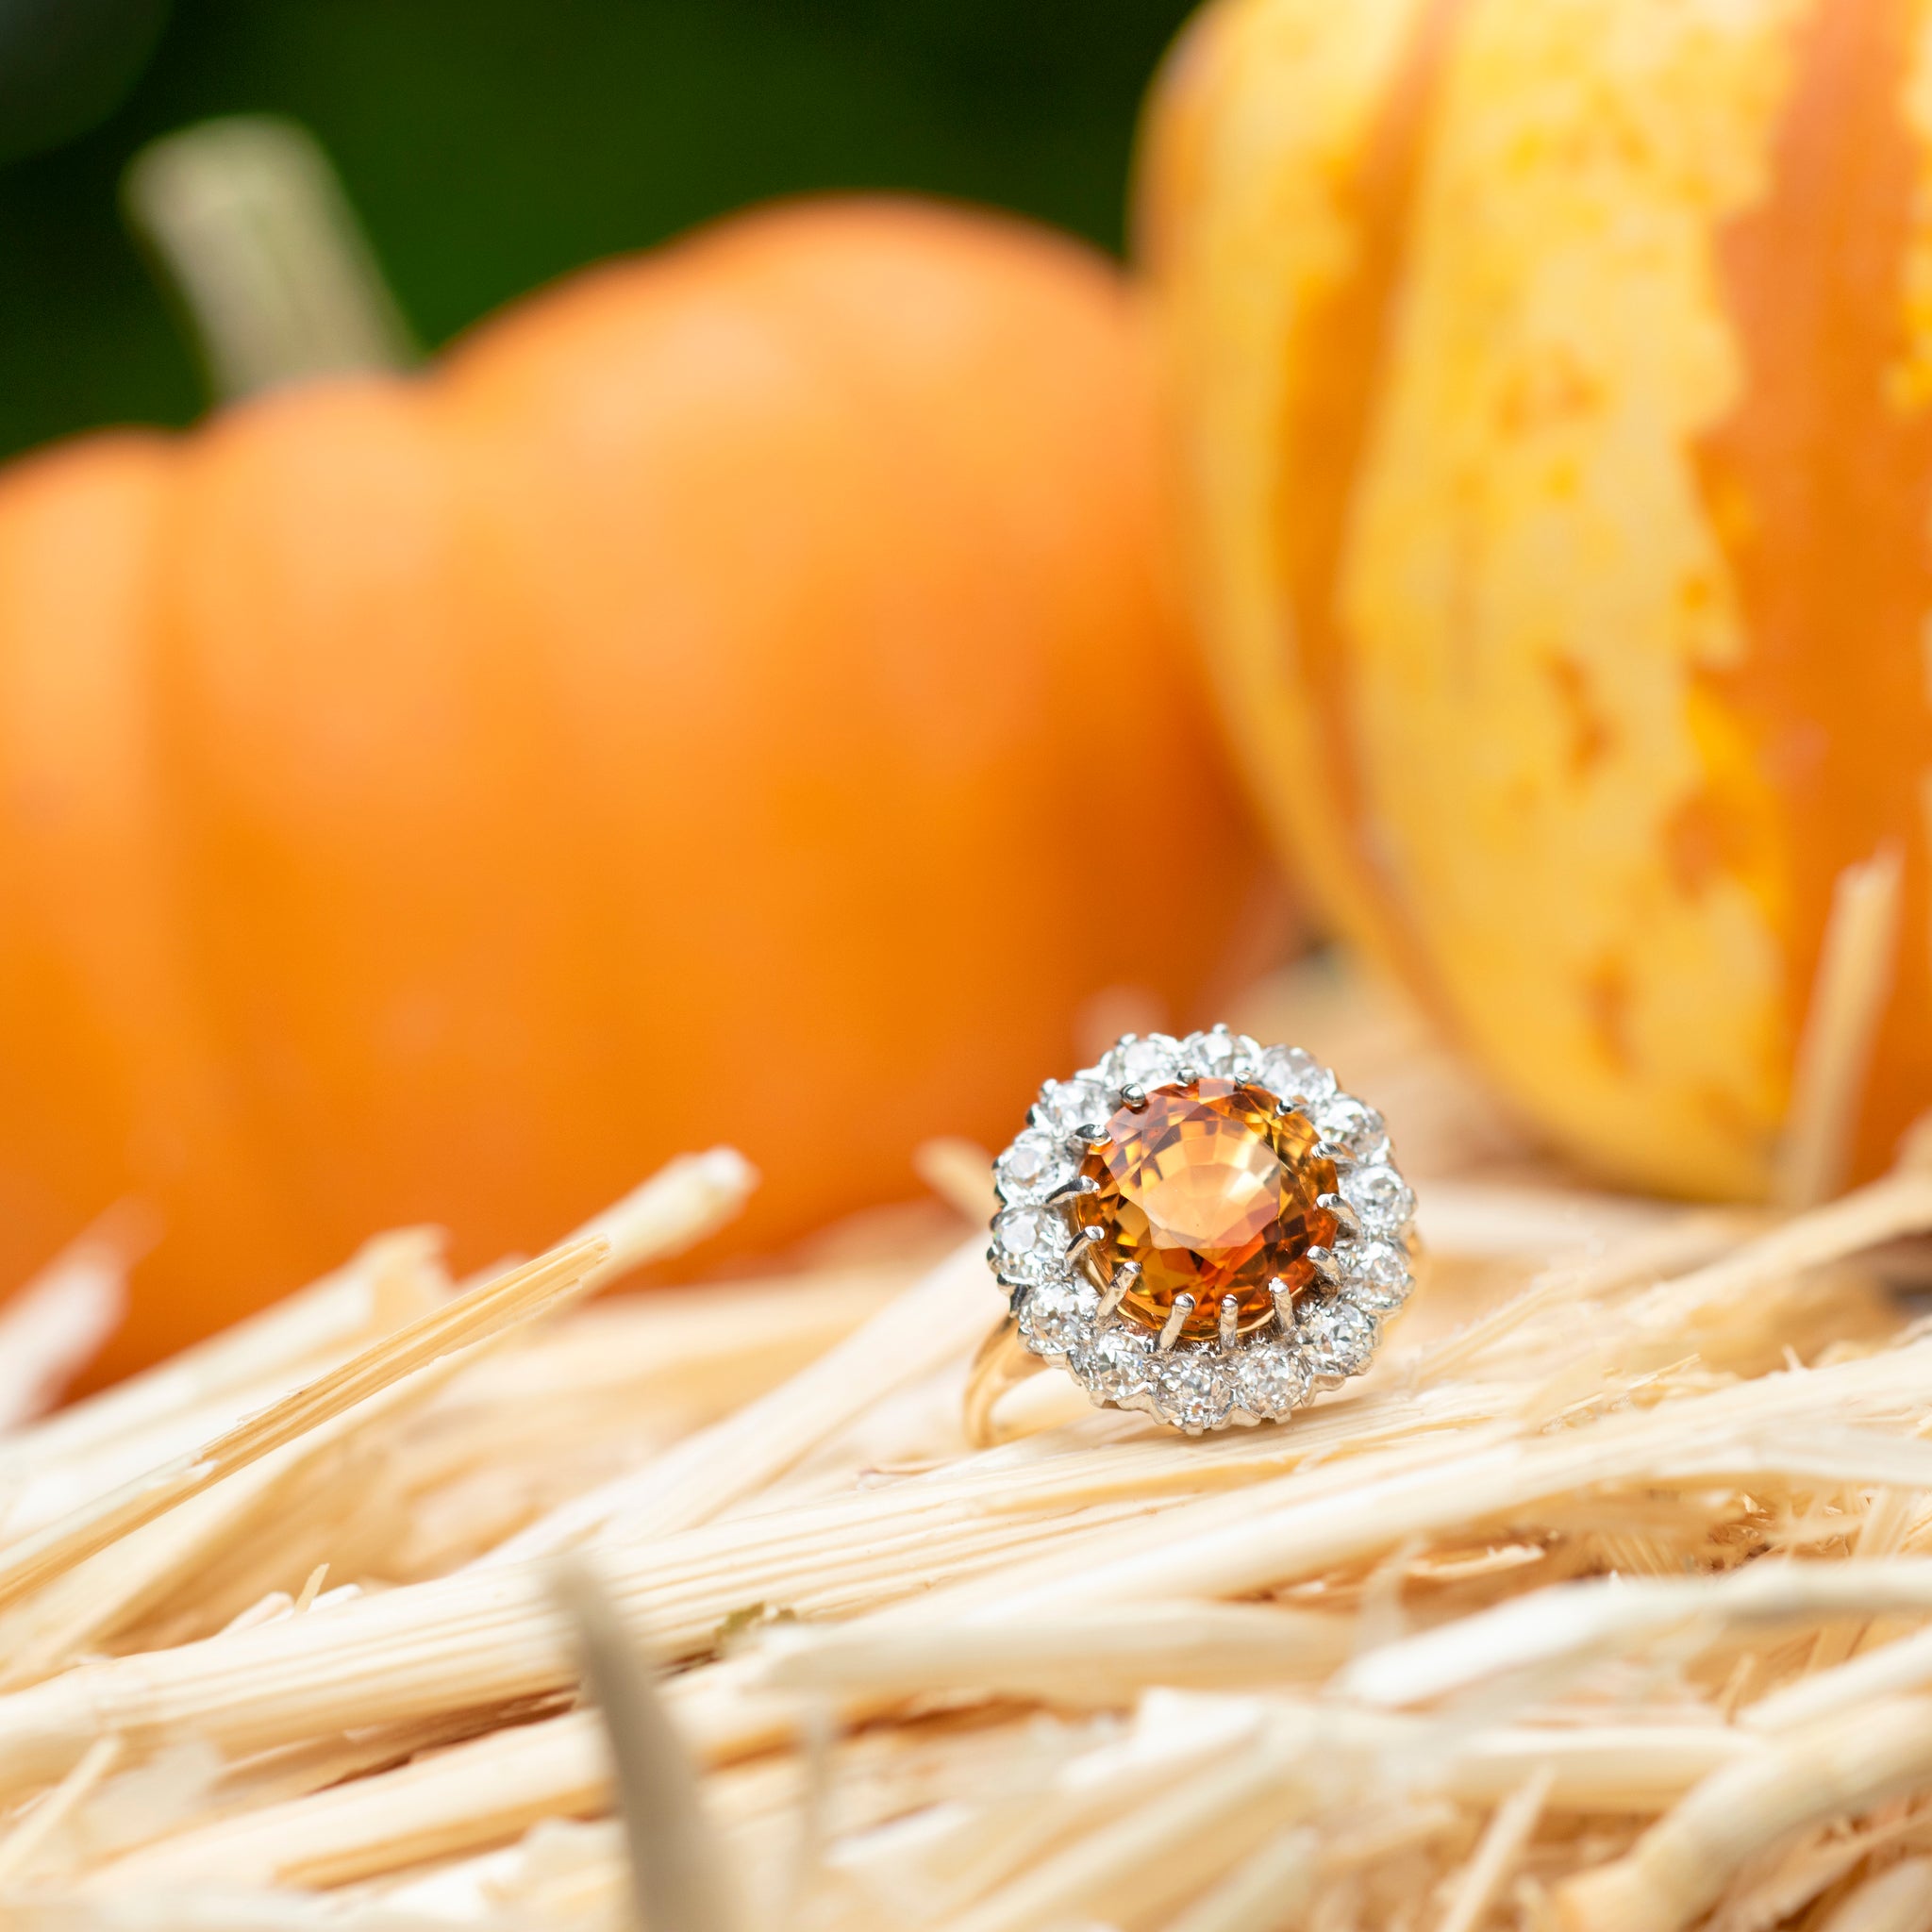 10 "Scary" Fun Facts You Didn't Know About November's Birthstone (Citrine)